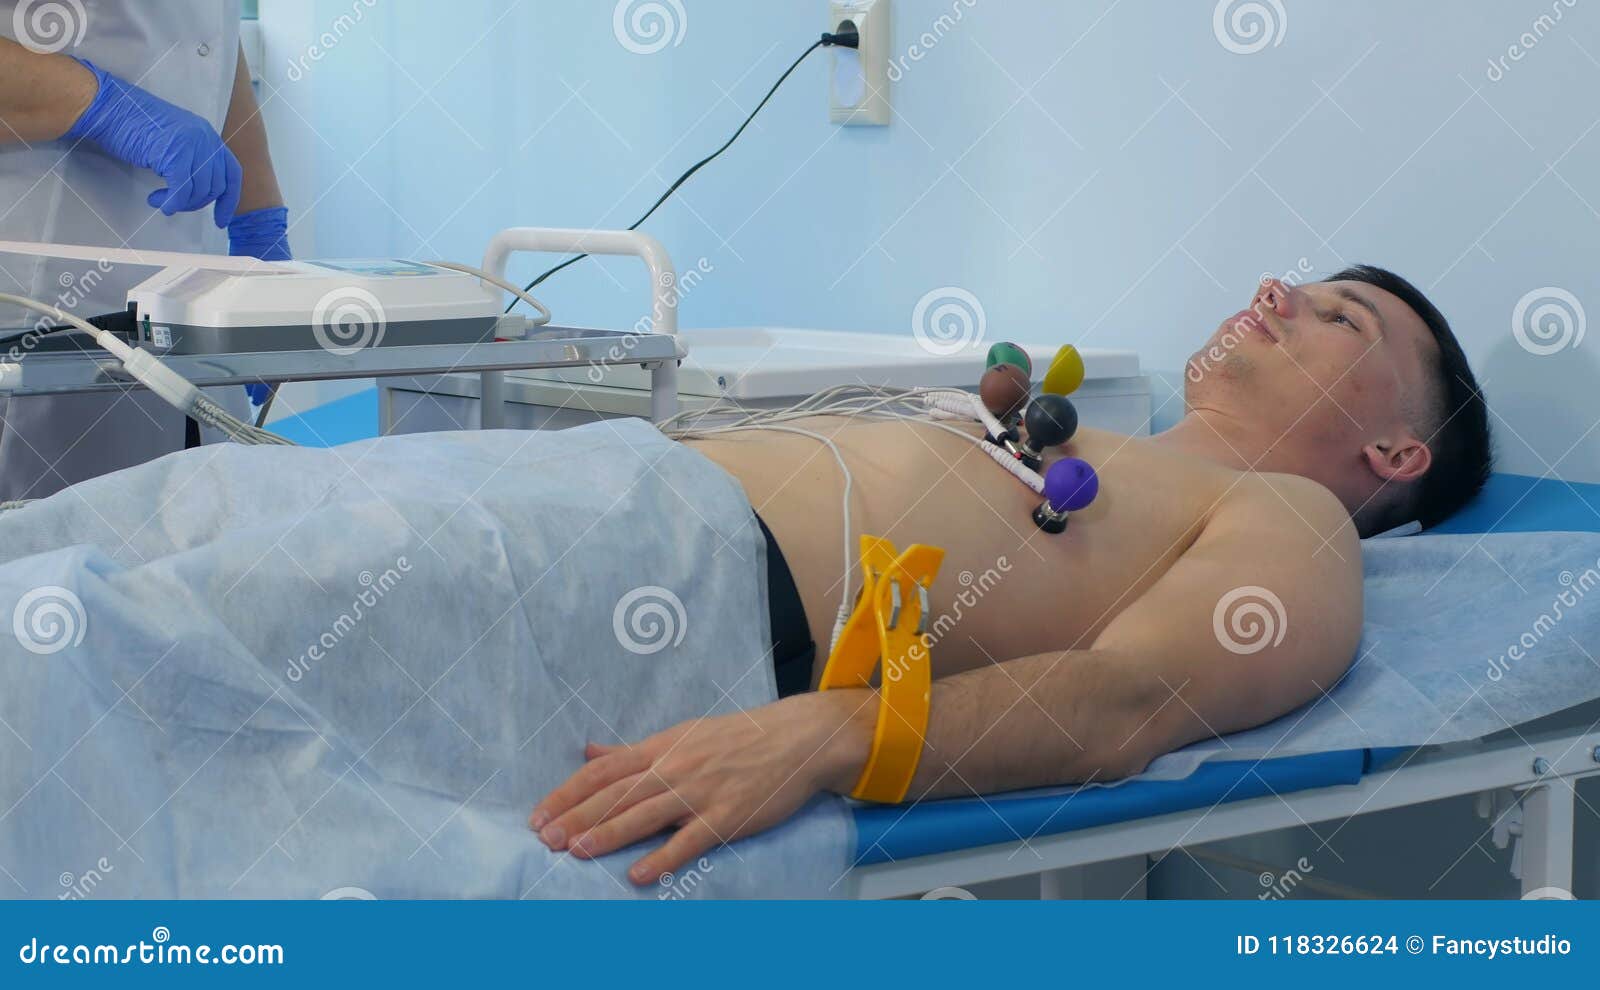 nurse performing ecg on a male patient